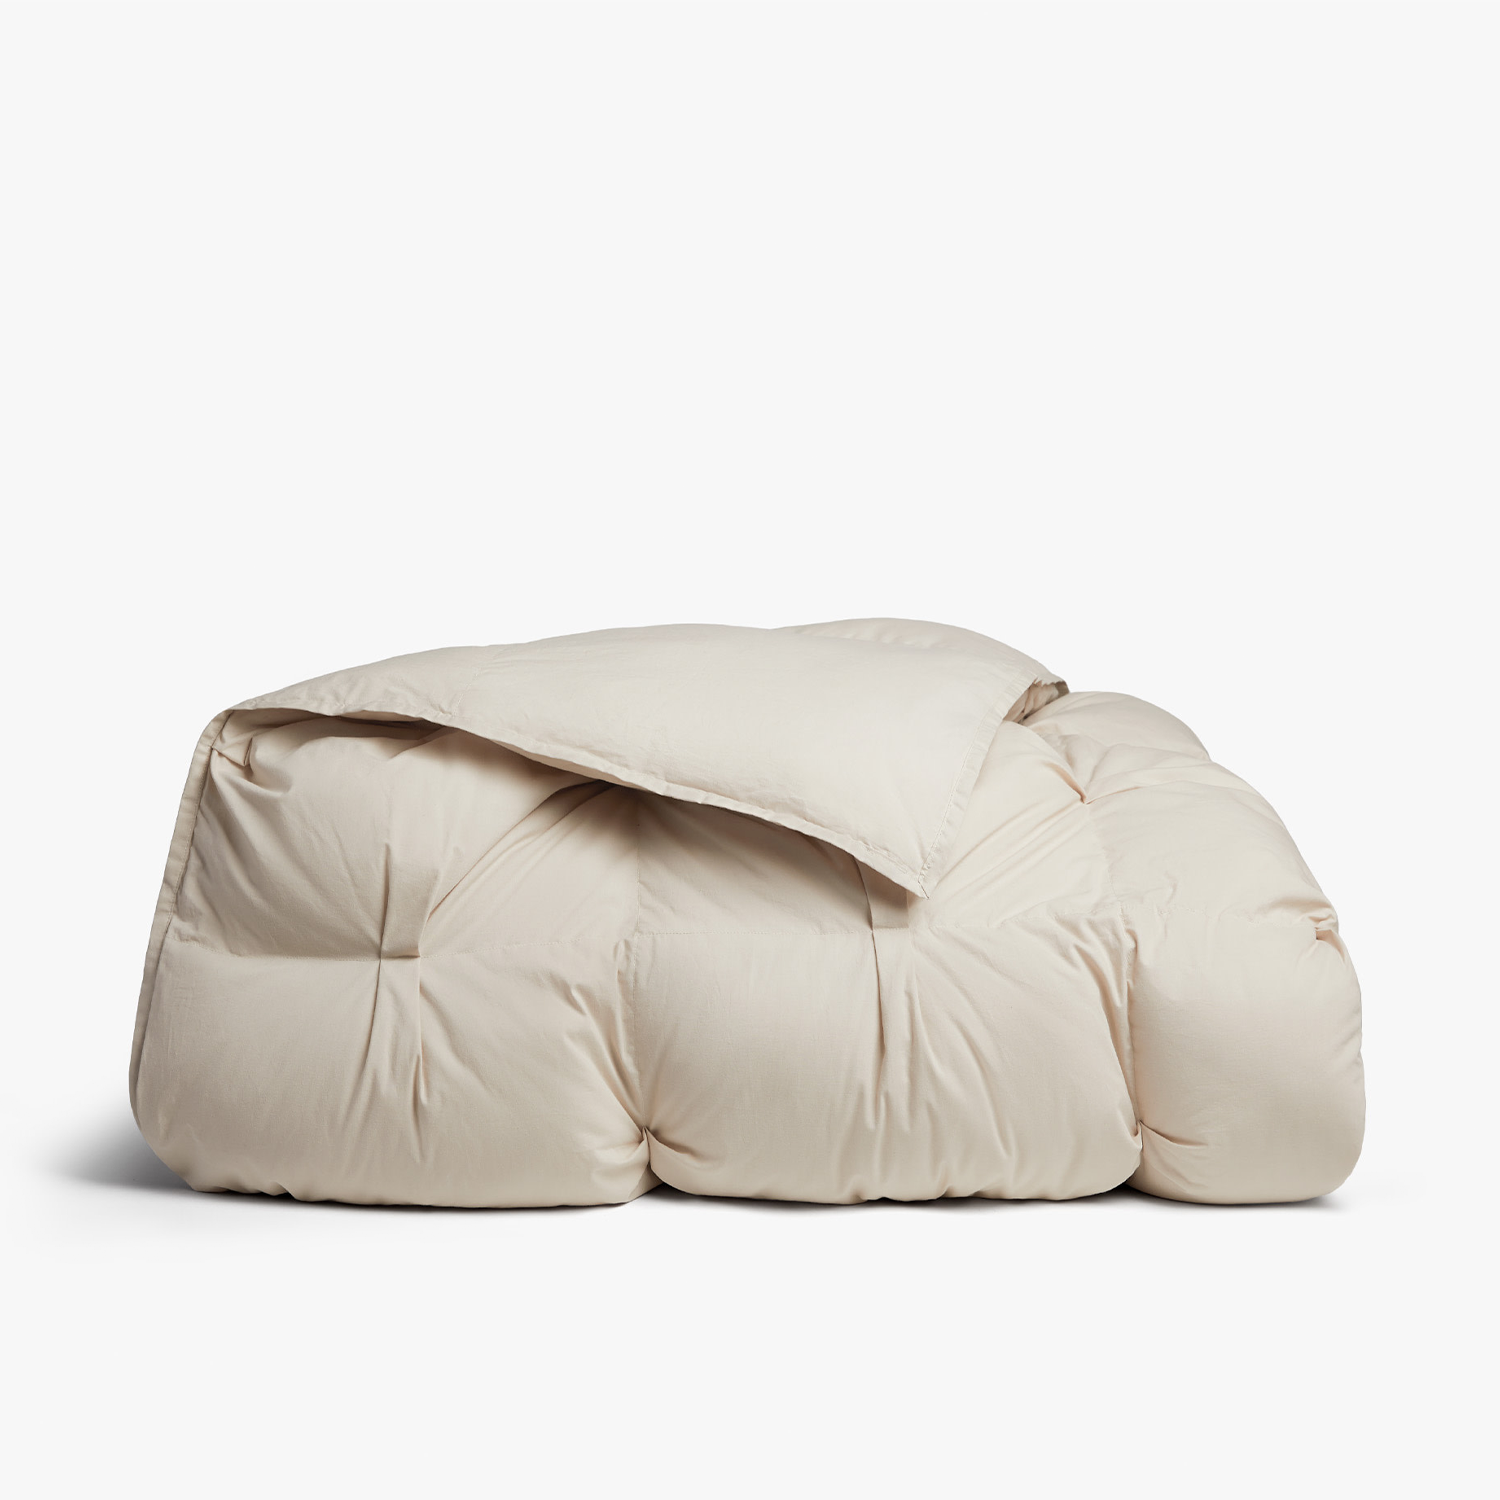 Bone colored puff comforter by Parachute